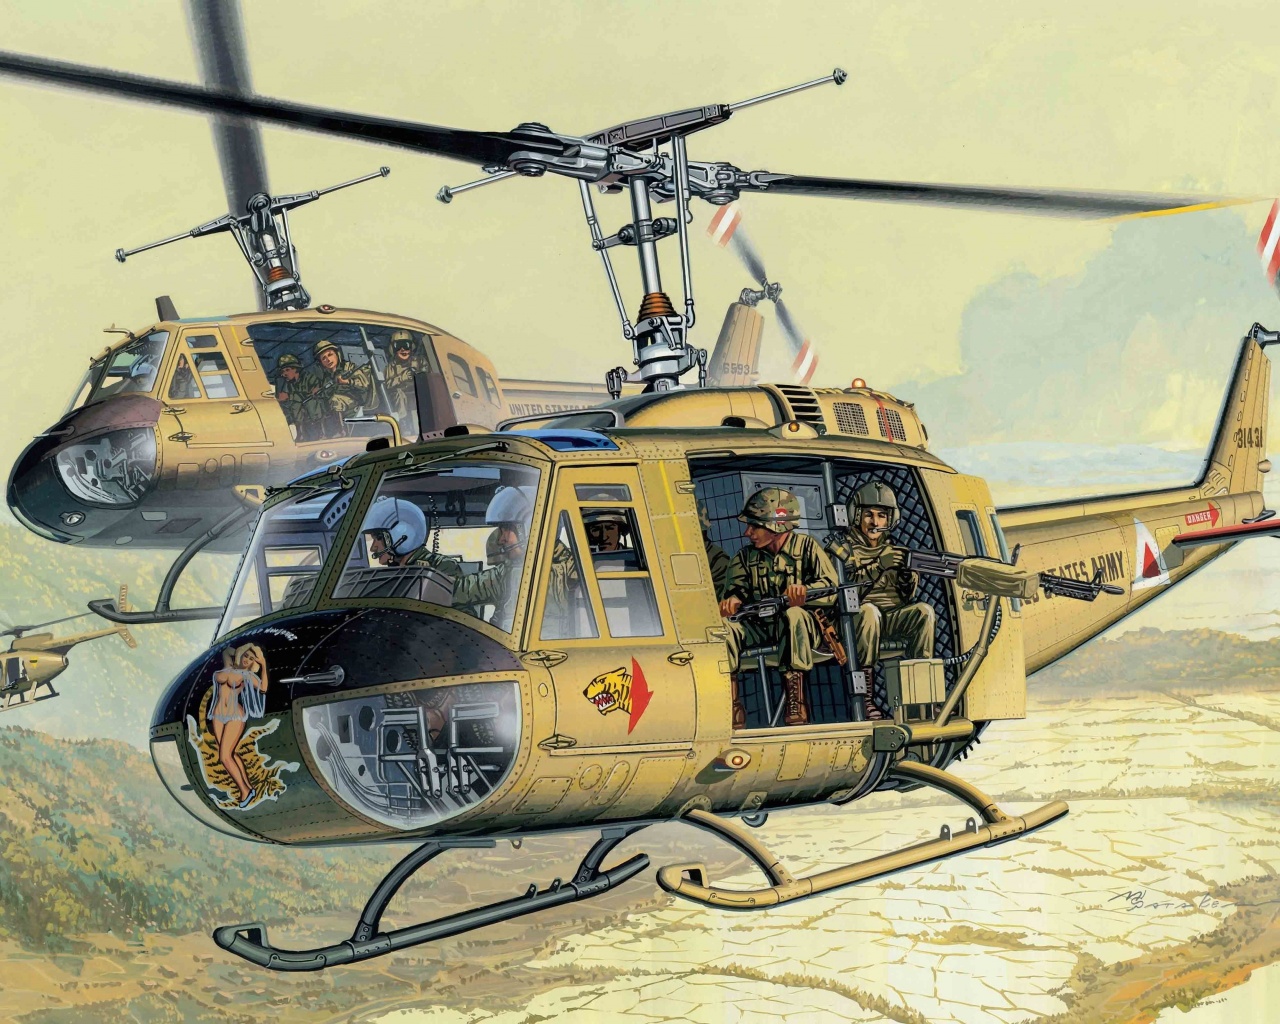 U.S. Army Bell UH-1D Iroquois